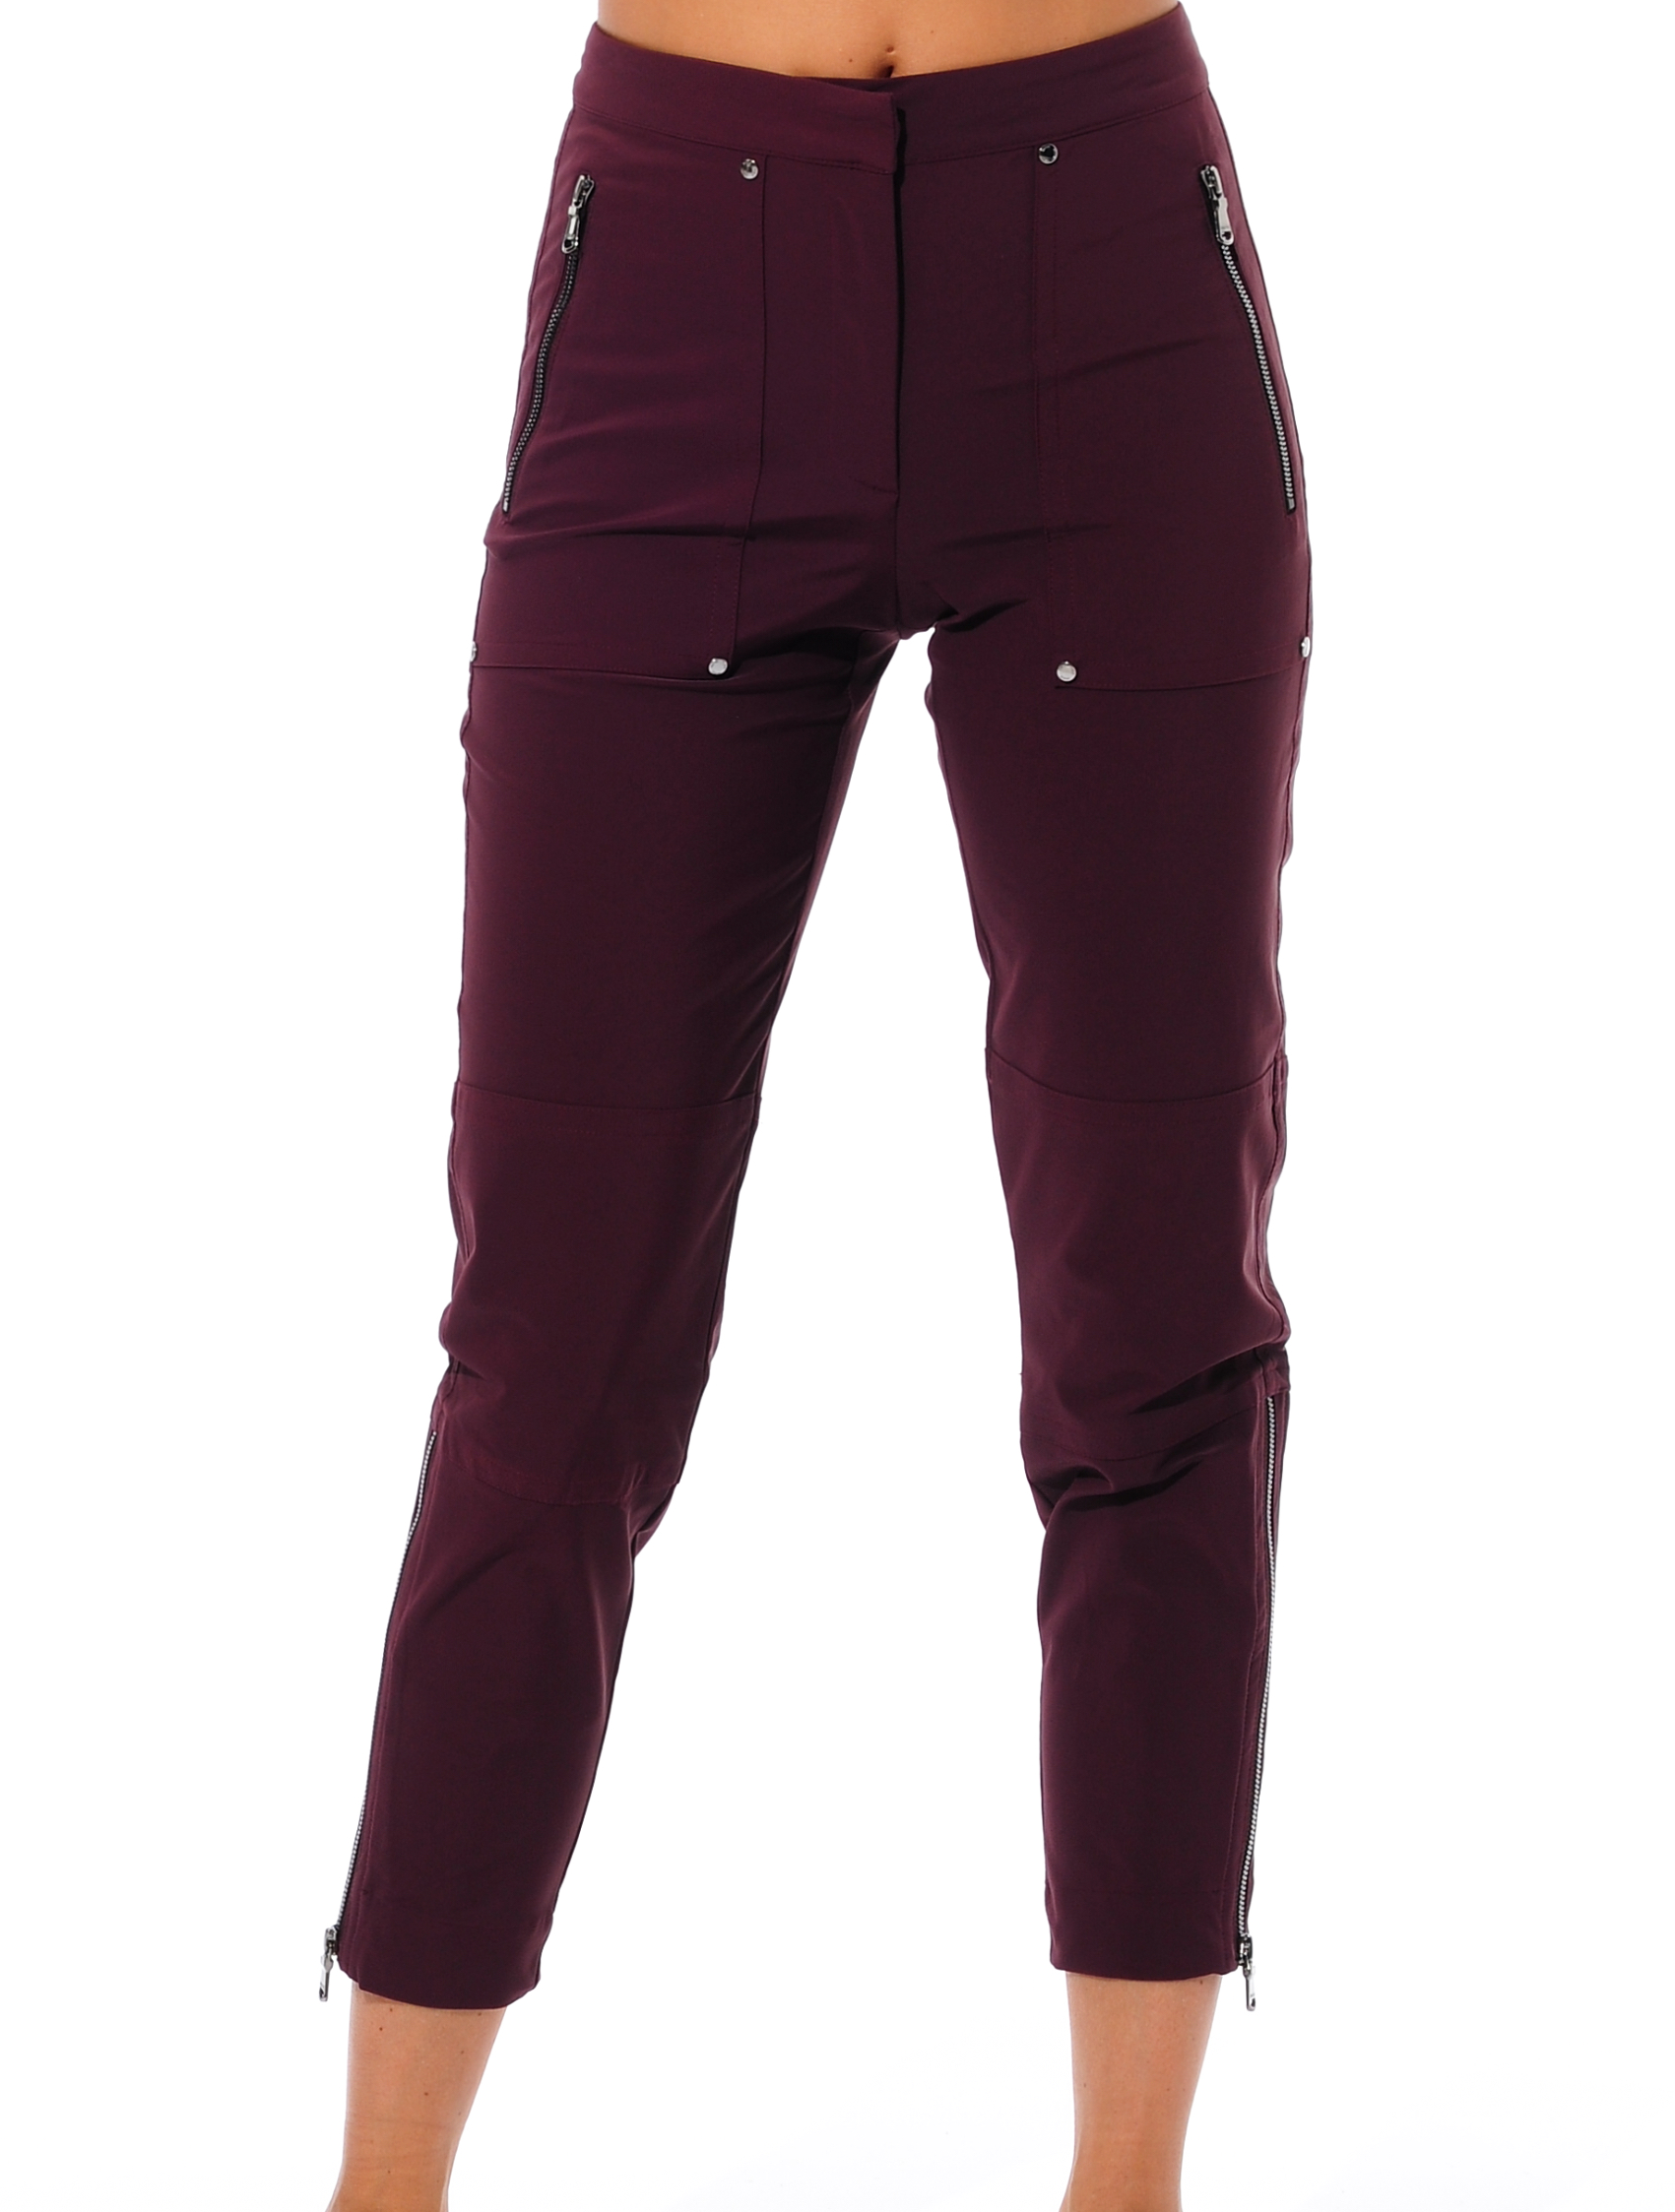 4way stretch tapered fit cargo pants bloodstone 